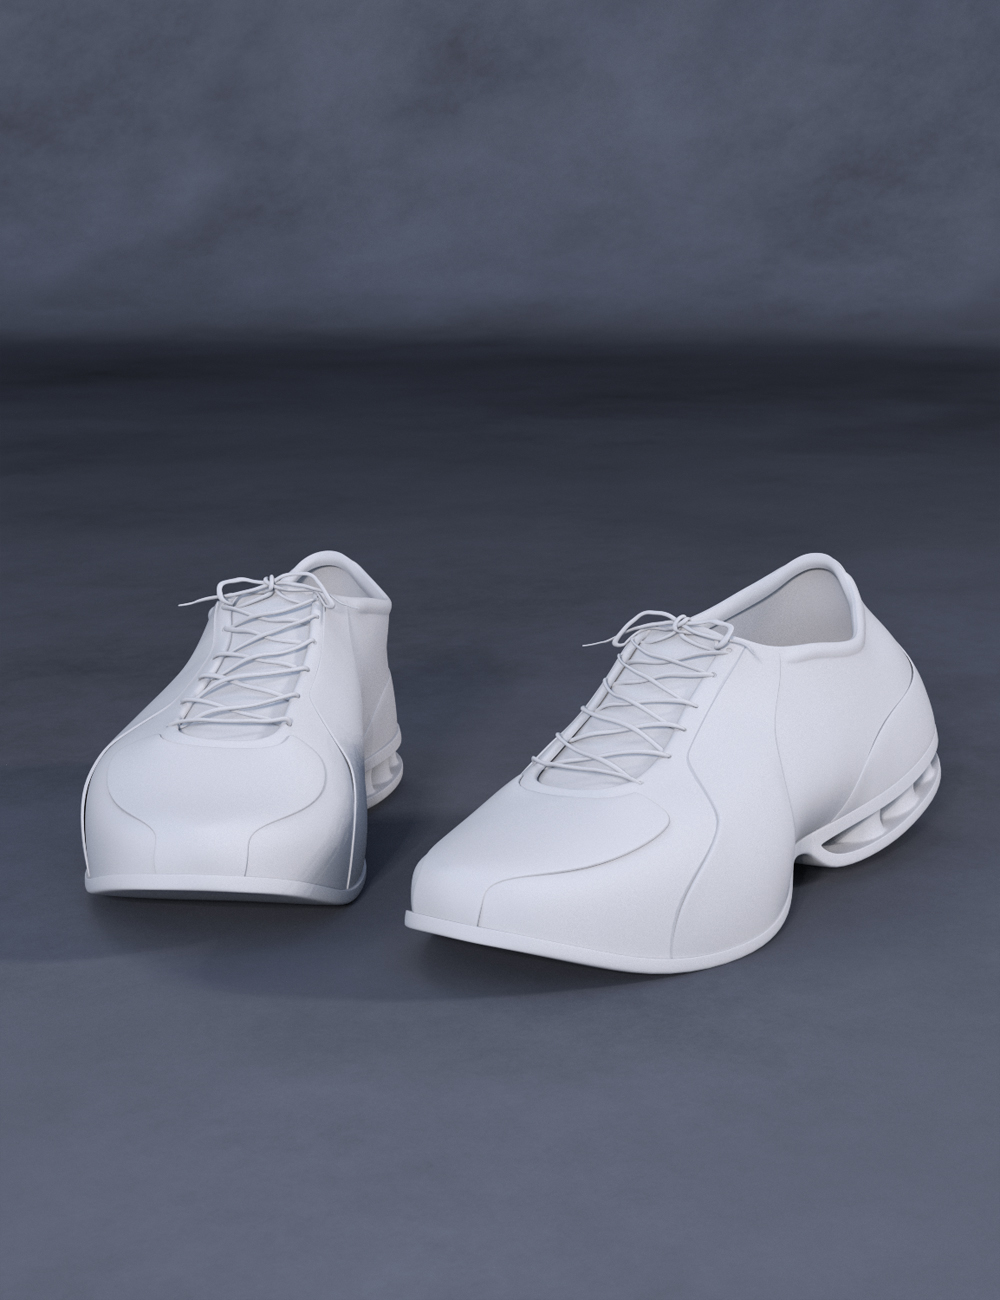 Cheerleading Squad Outfit Shoes for Genesis 8 and 8.1 Males by: Barbara BrundonUmblefuglySade, 3D Models by Daz 3D